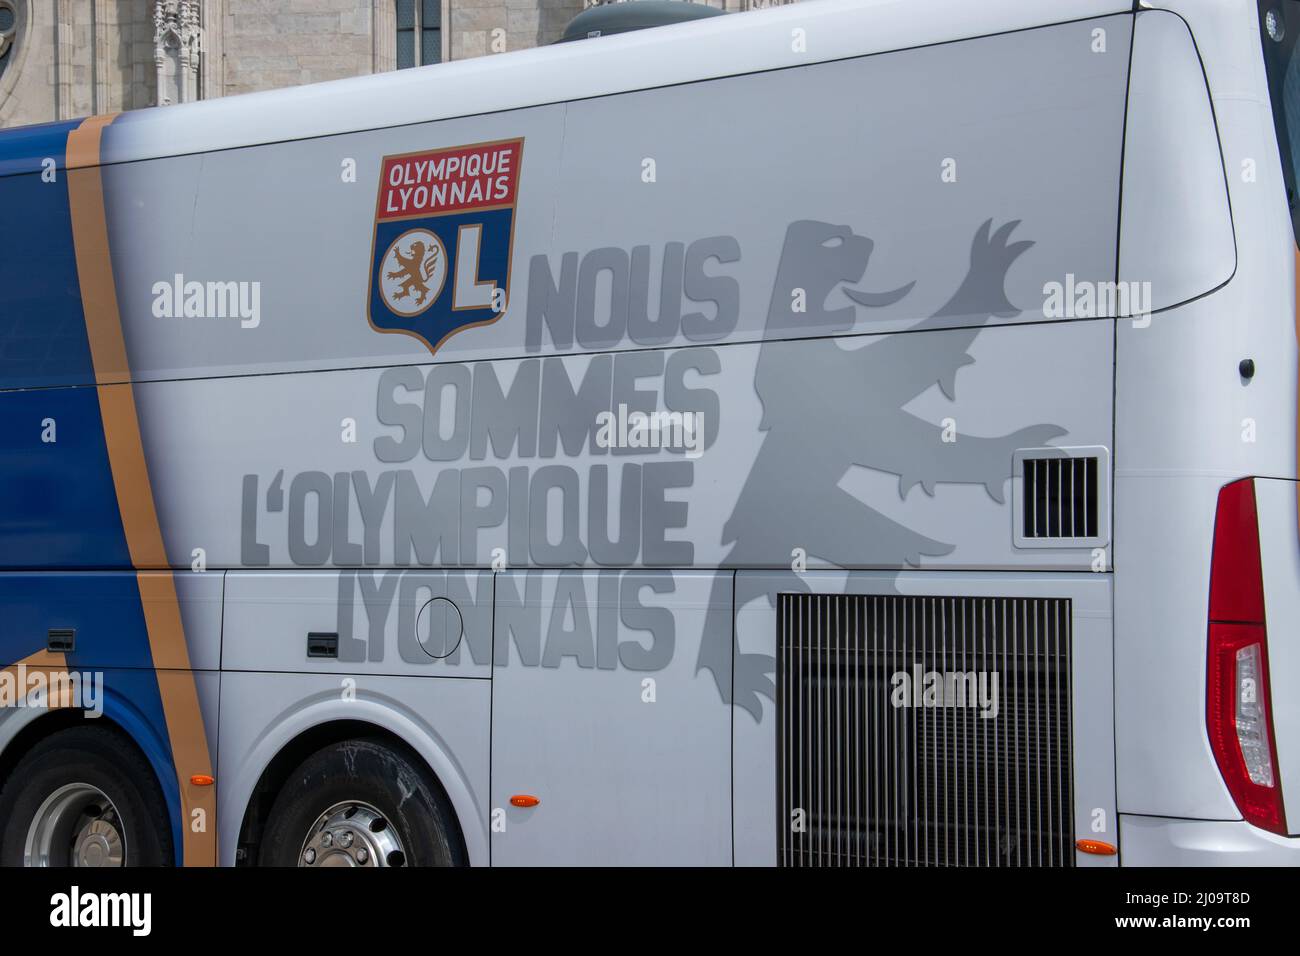 Team Bus for the Olympique Lyonnais, Lyon or OL, French professional football club while in Budapest, Hungary, May 17, 2019. Stock Photo